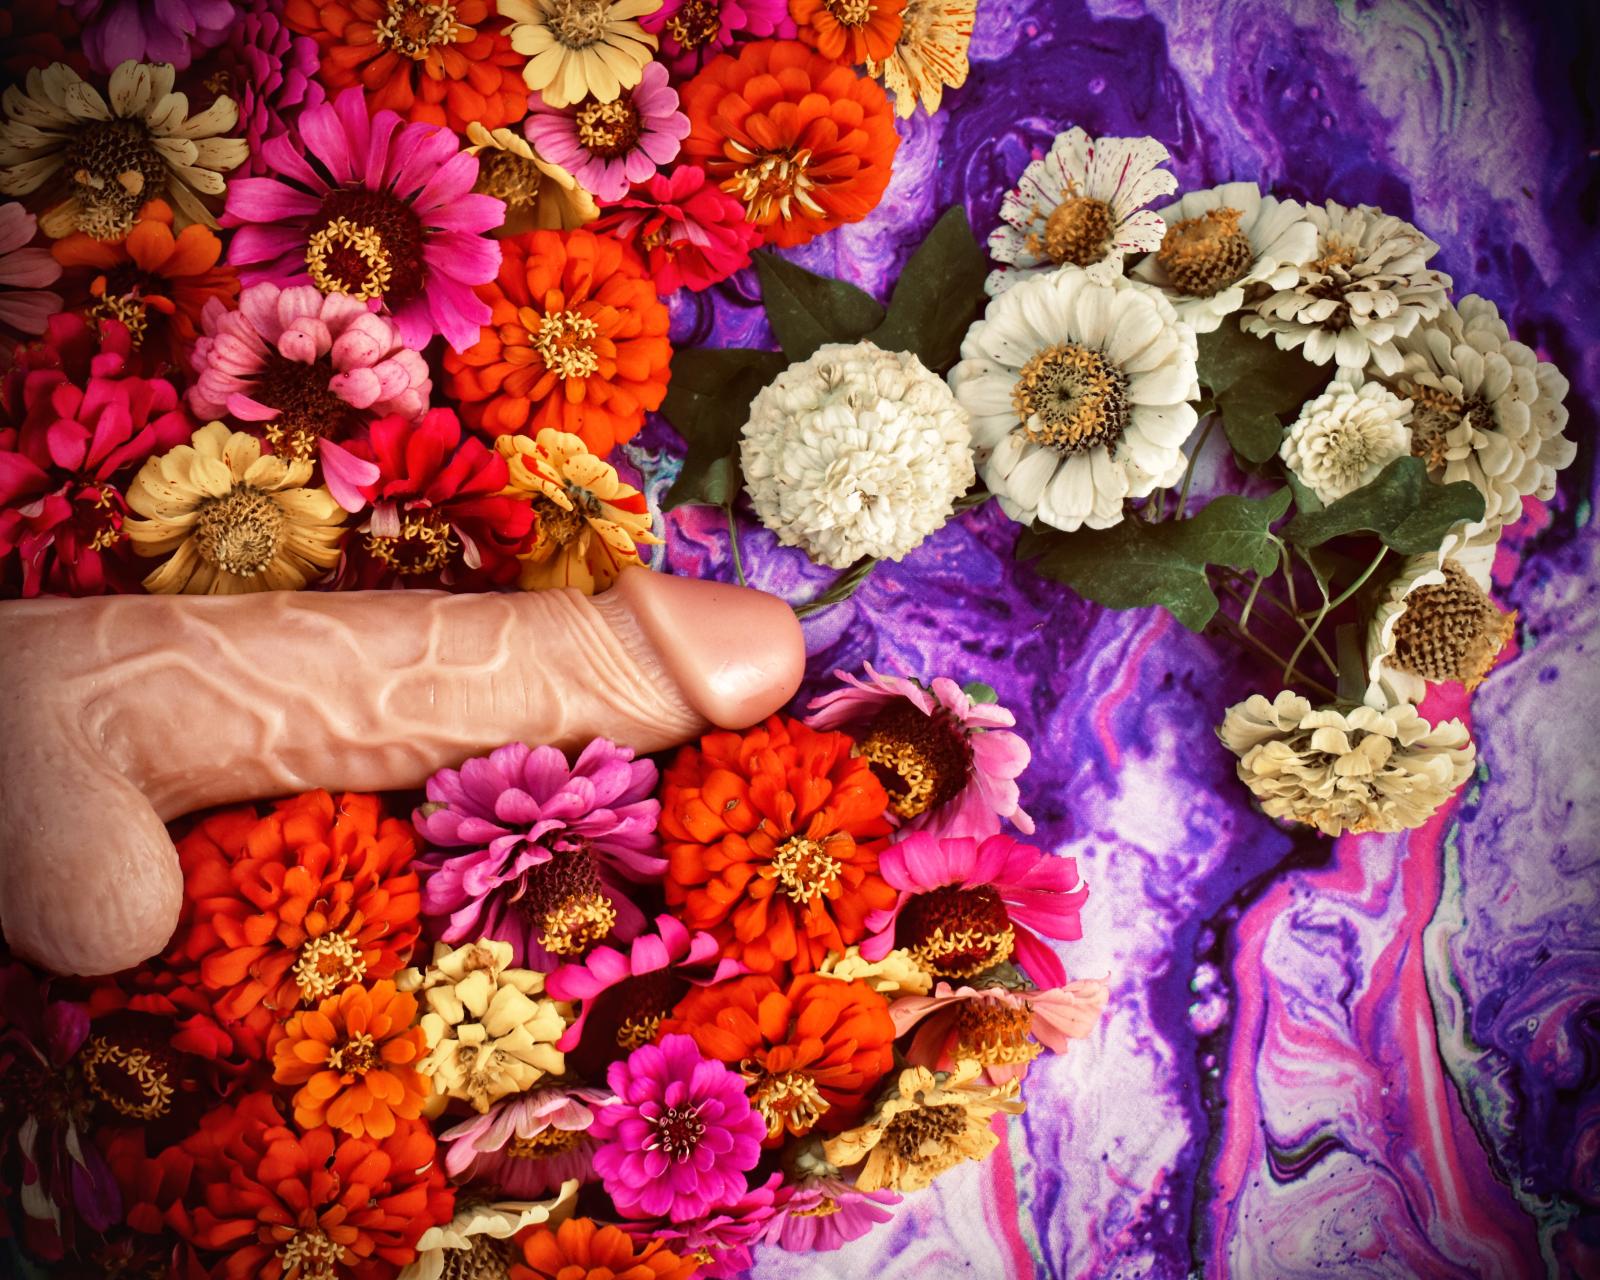 Penis sex toy with flowers in B.... (Photo/Kathryn Coers Rossman)